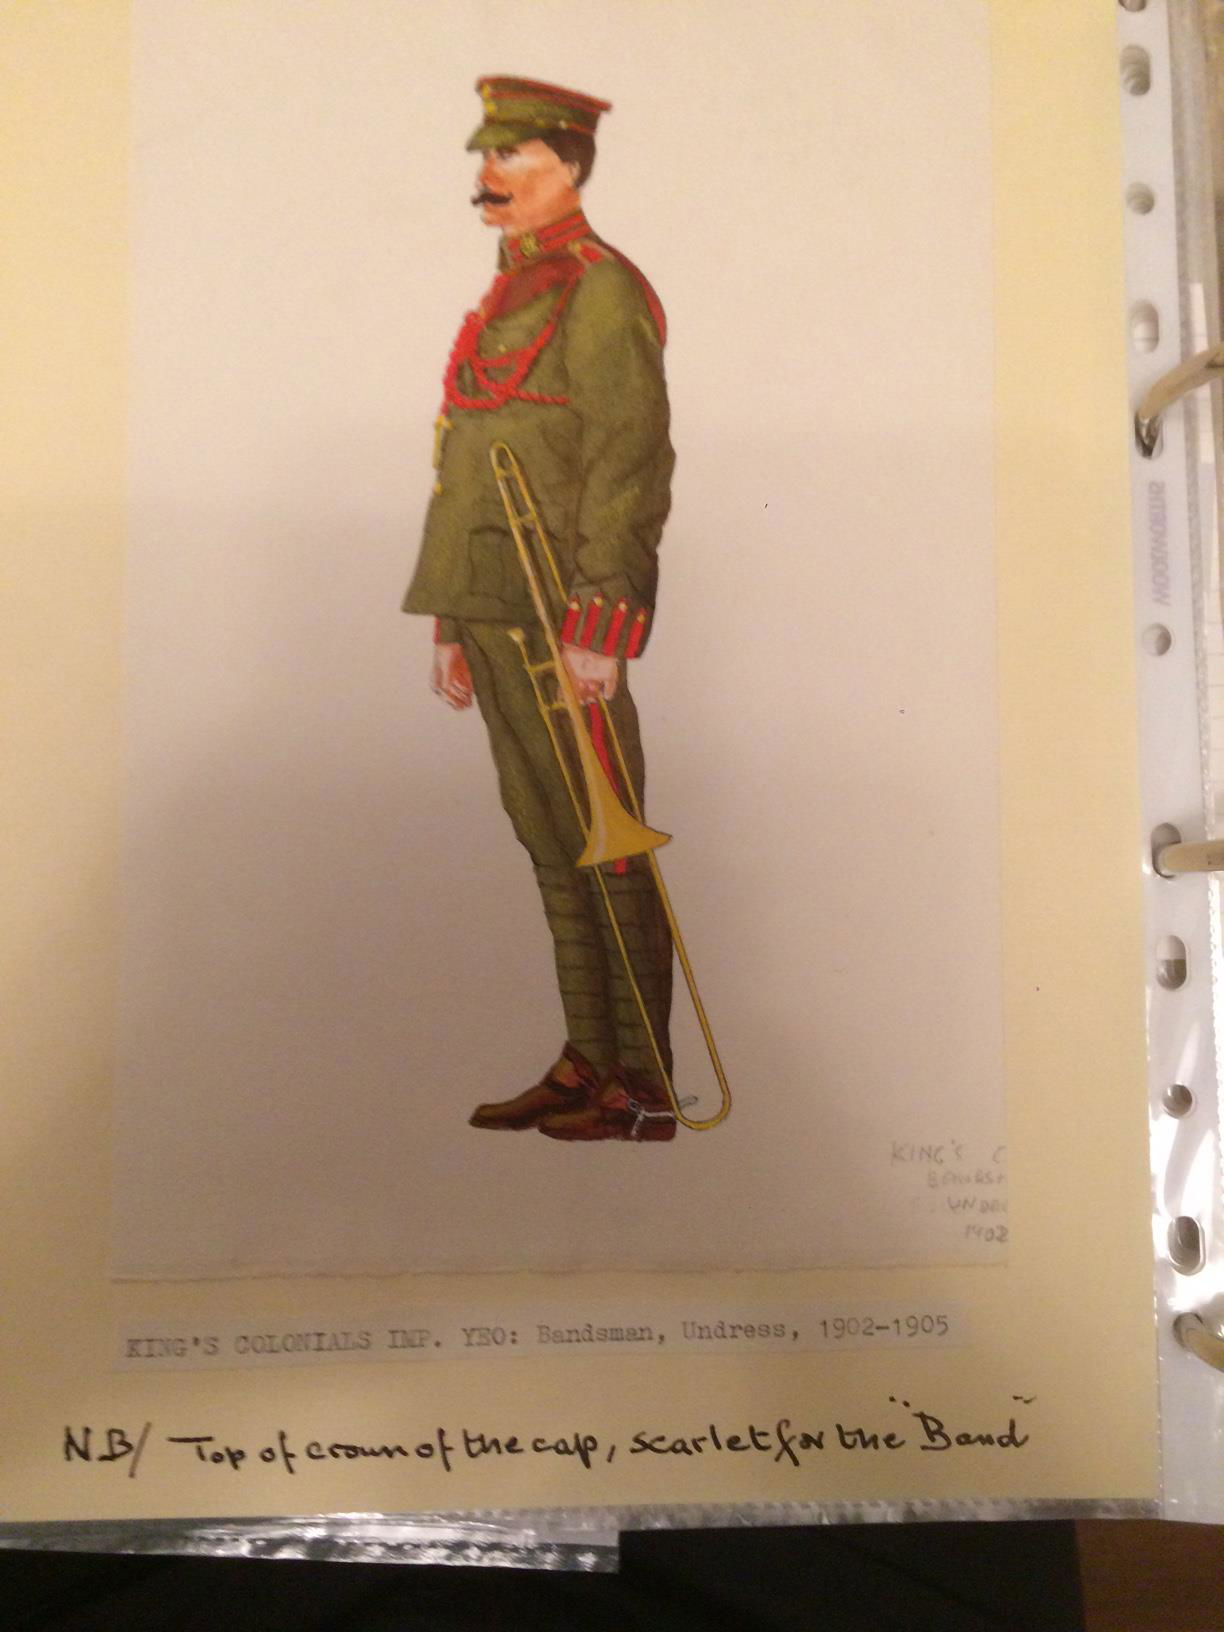 Painting of a Bandsman of the 4th County of London (King’s Colonials) Imperial Yeomanry in Undress uniform circa 1902-05, note the scarlet top on the crown of the cap (R. J. Smith collection).